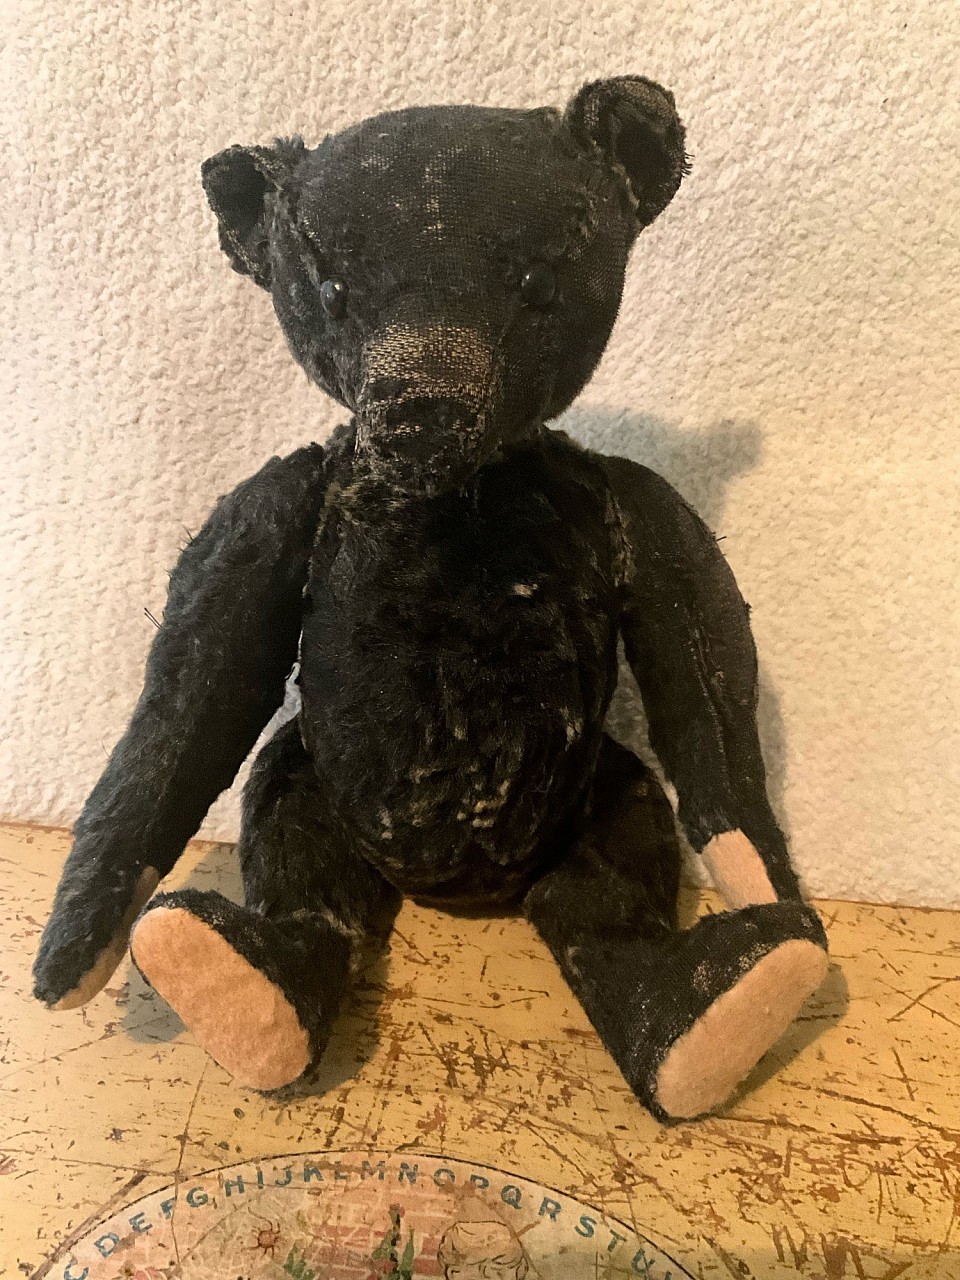 16” antique black mohair bear with boot button eyes. He feels to be stuffed with crunchy wood wool. There are areas of mohair inserts. He has a nice humpback and profile. All joints move freely and he comes wearing an antique red overall with Peek Freans teddy bear biscuit medallion pinned to it. A rare black bear indeed. ~$1495